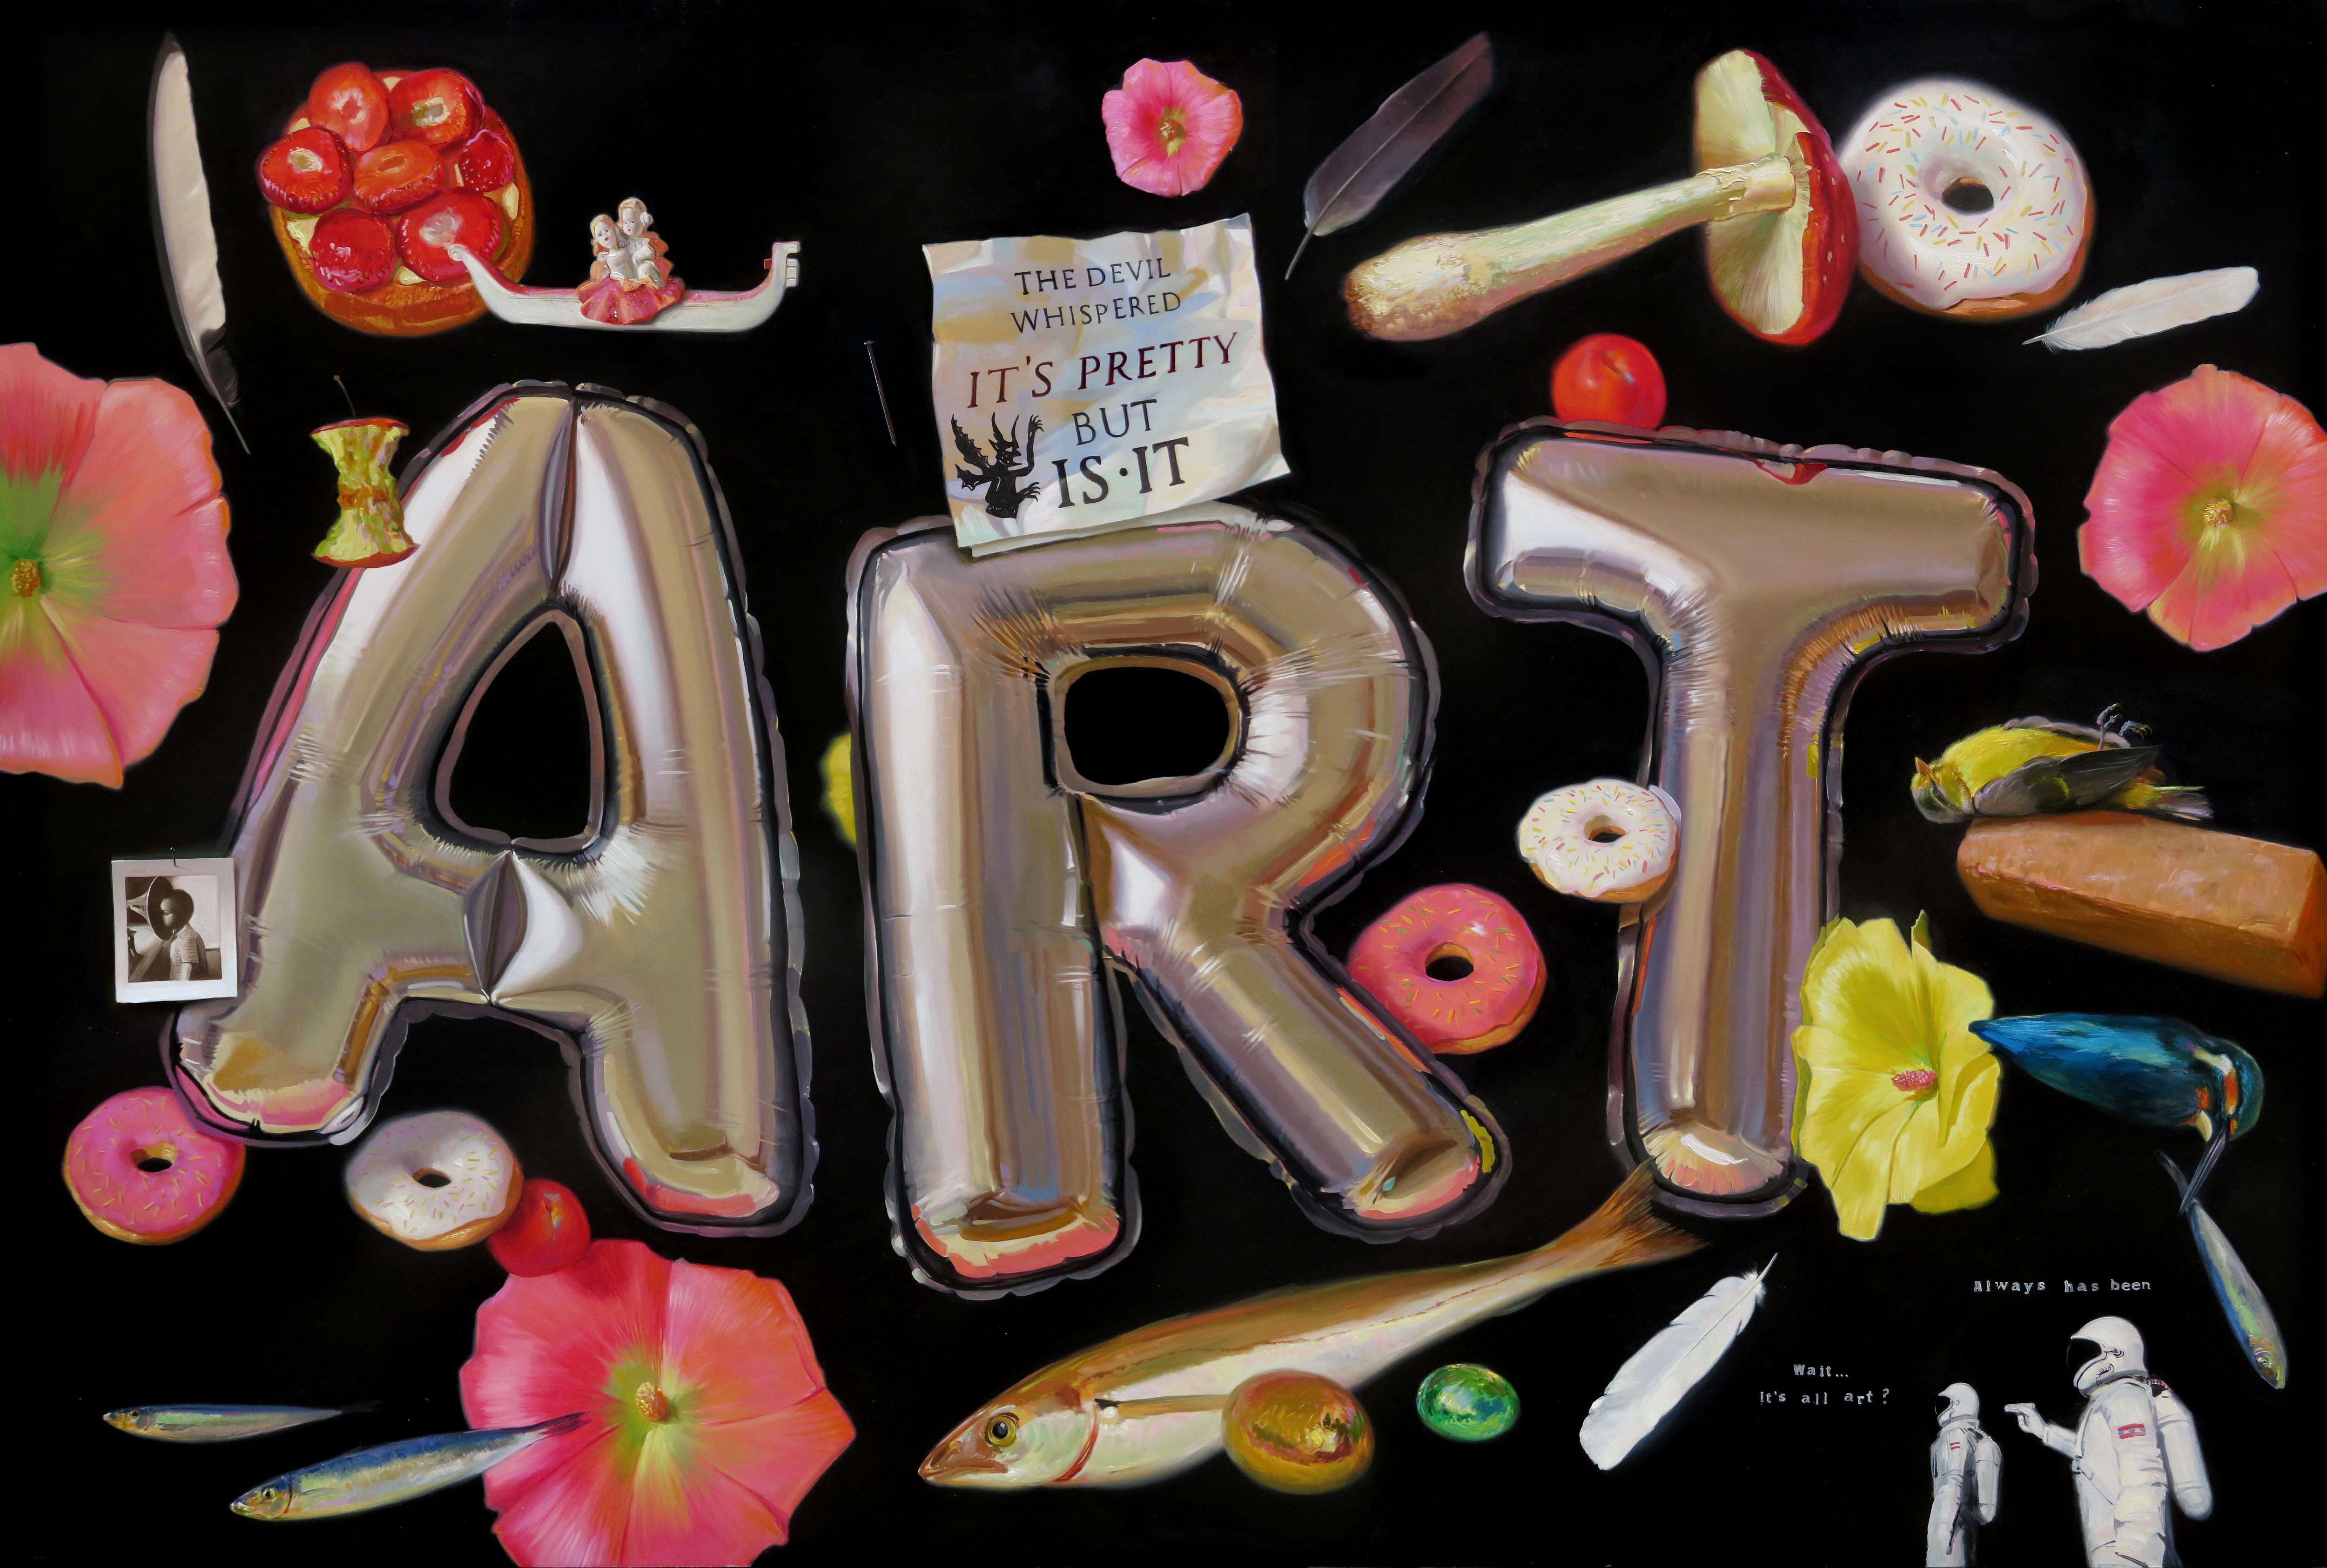 IS IT ART -  21st Century Contemporary Painting, balloons & still-life subjects